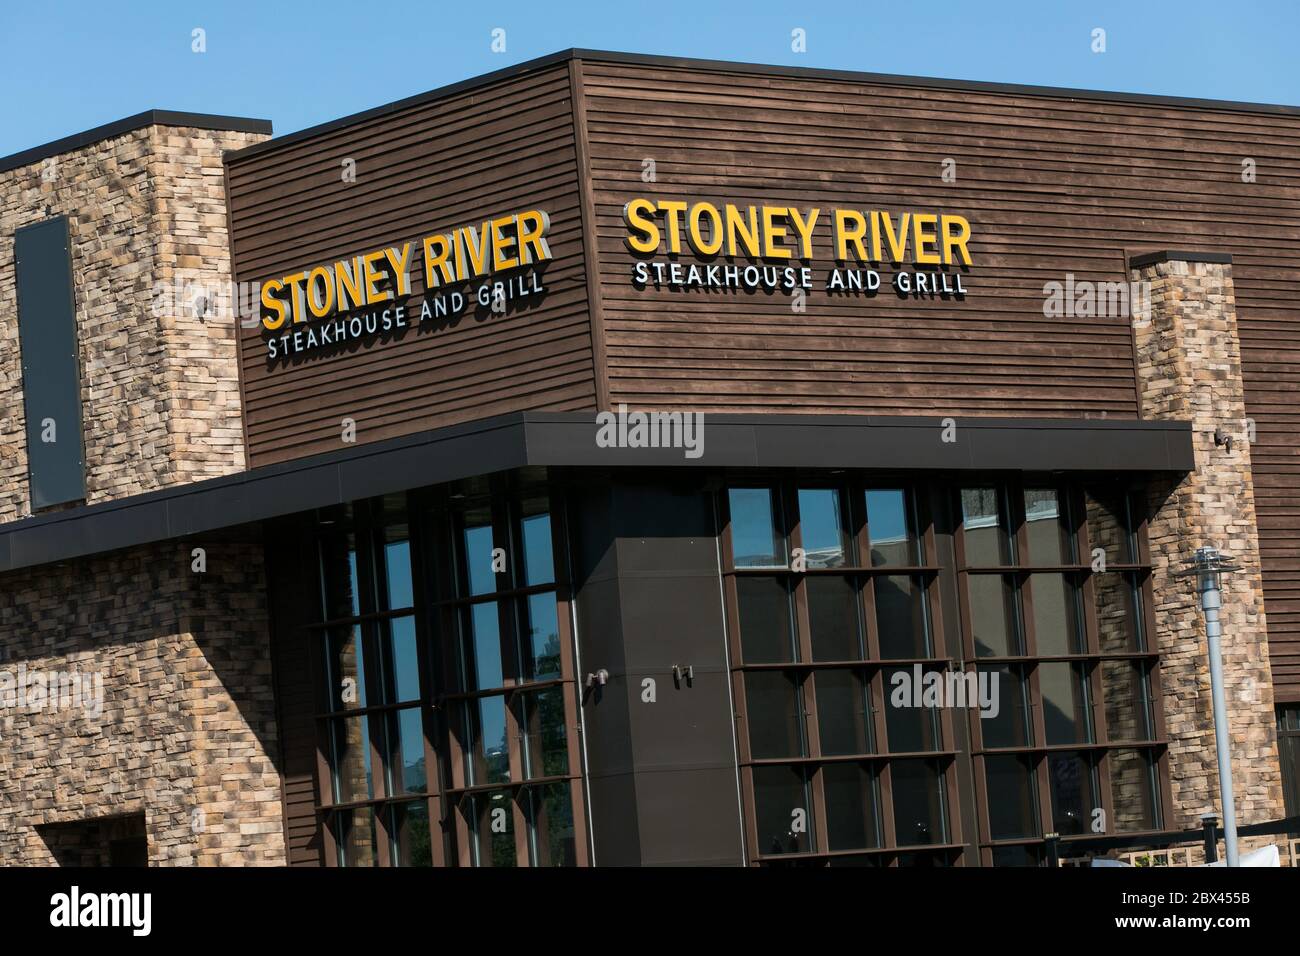 A logo sign outside of a Stoney River Steakhouse and Grill restaurant location in Annapolis, Maryland on May 25, 2020. Stock Photo